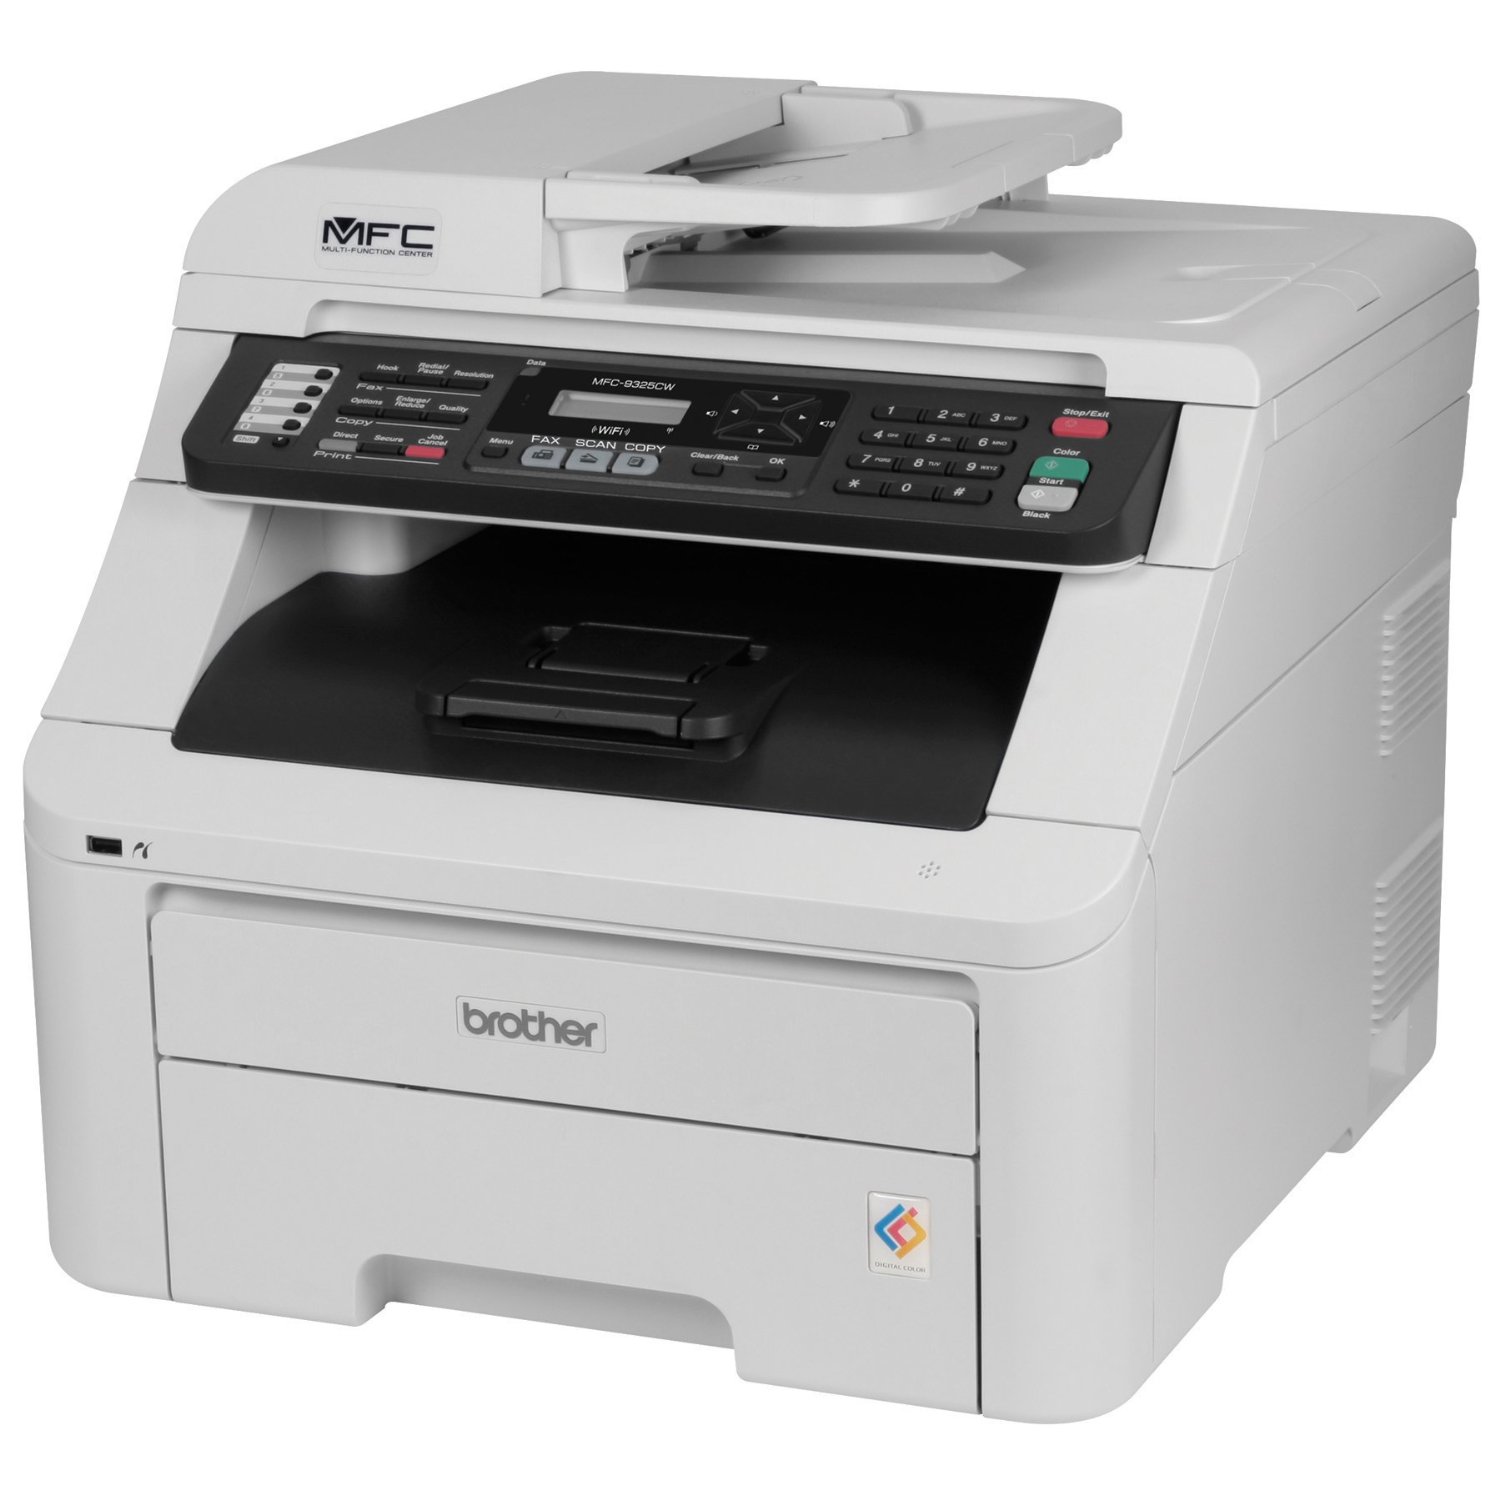 Best Brother MFC9325CW Wireless Color Printer (Scanner, Copier & Fax